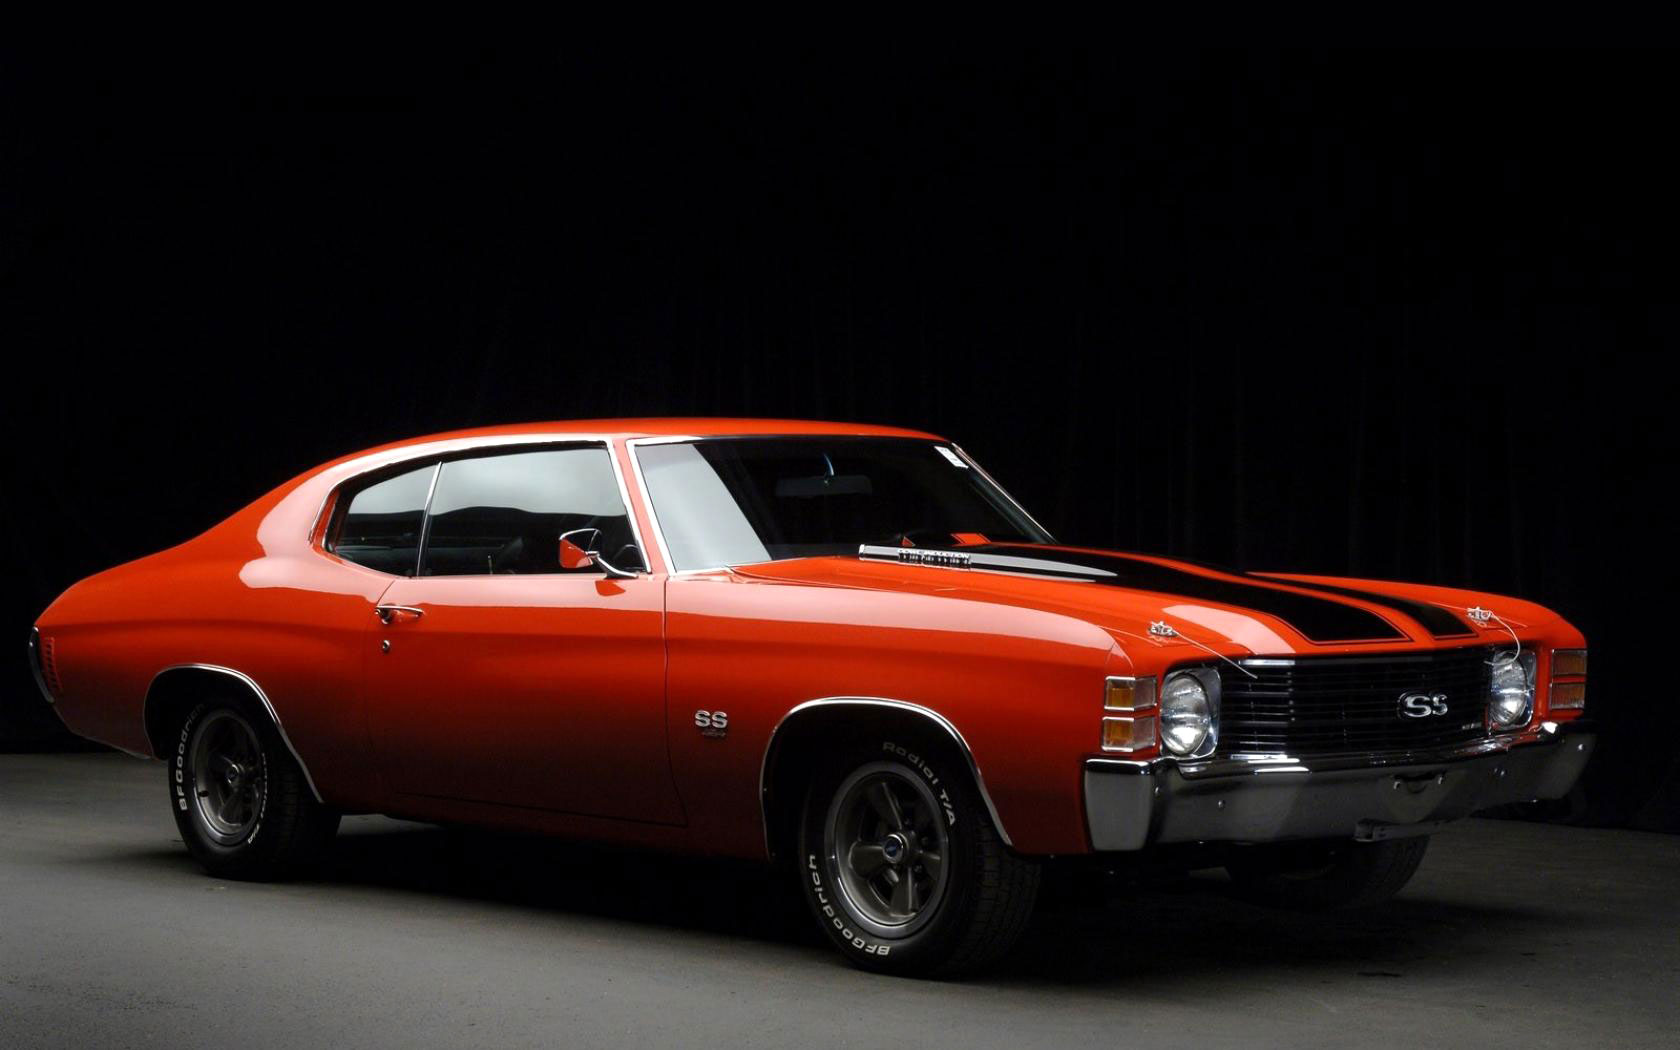 Chevelle SS Wallpaper 1971 Red with black stripes   1680 08 1680x1050